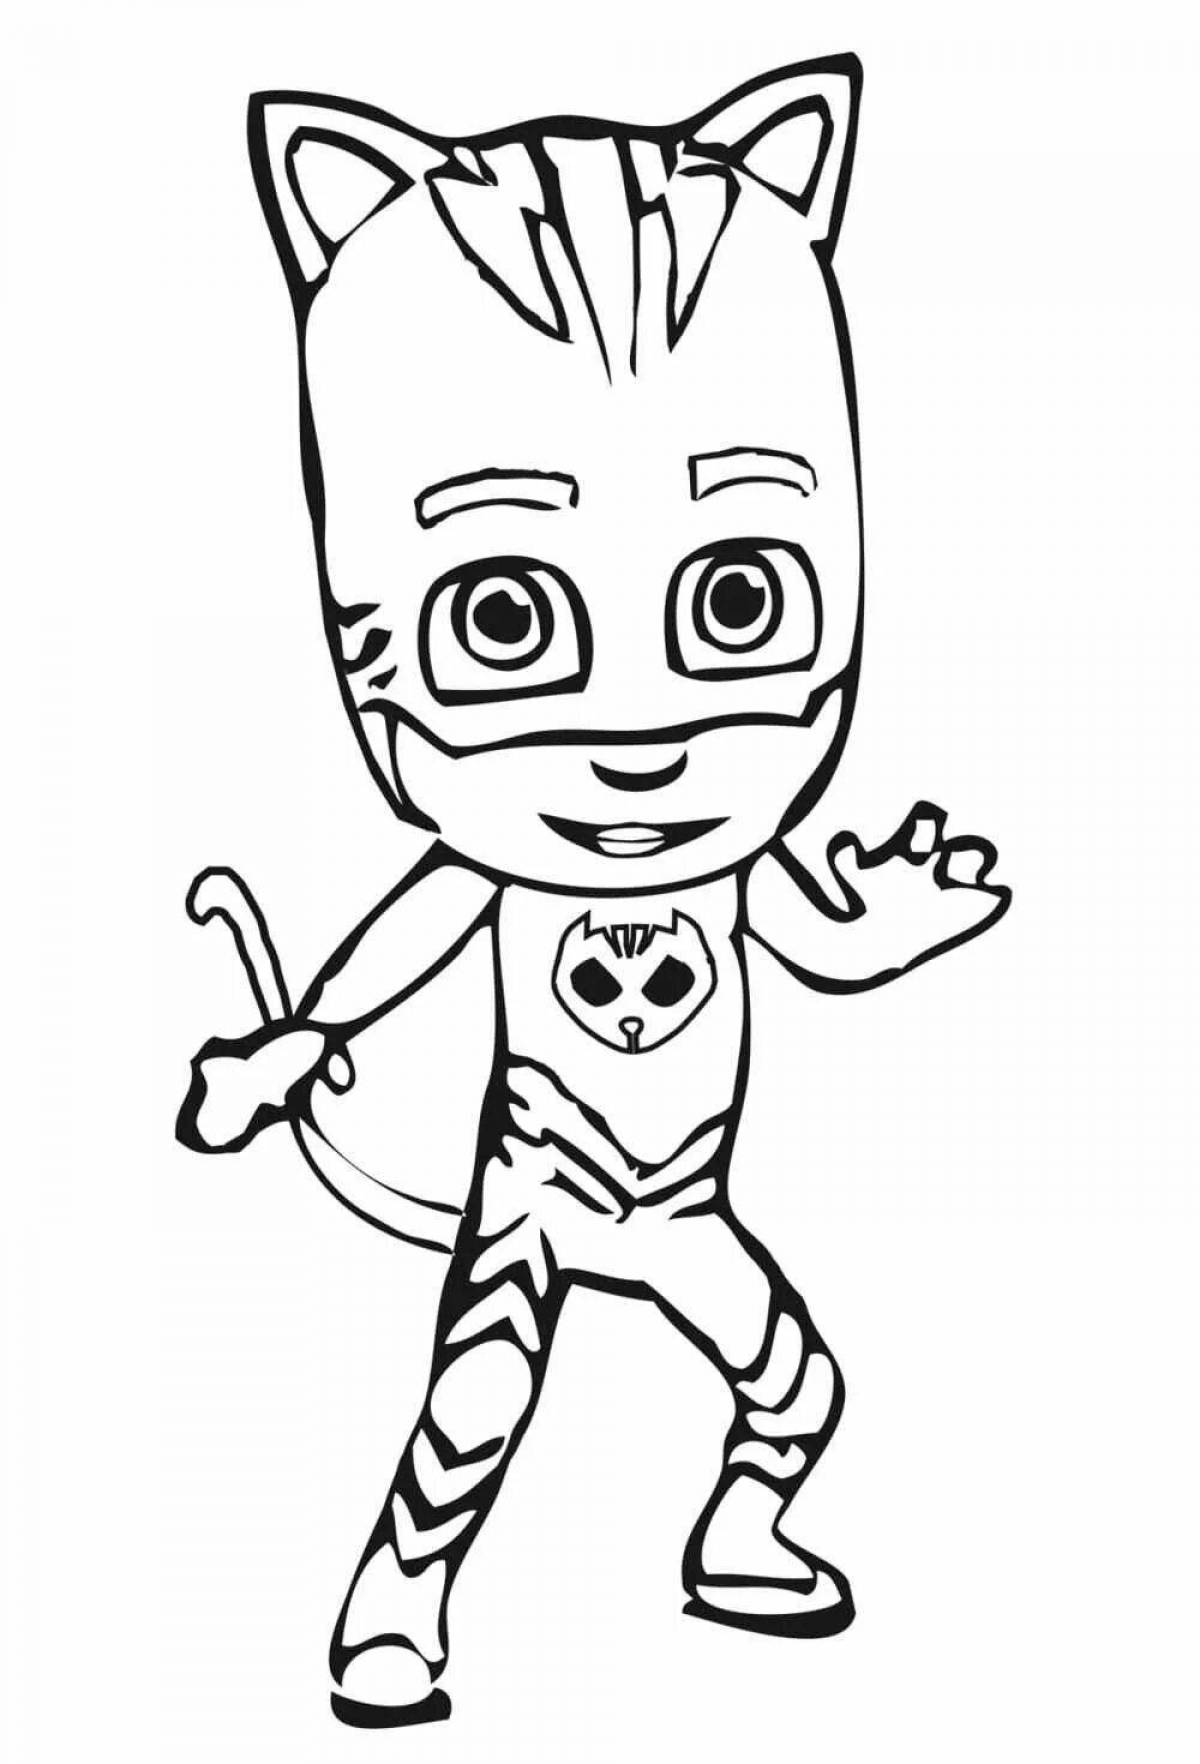 Coloring page attractive masked characters